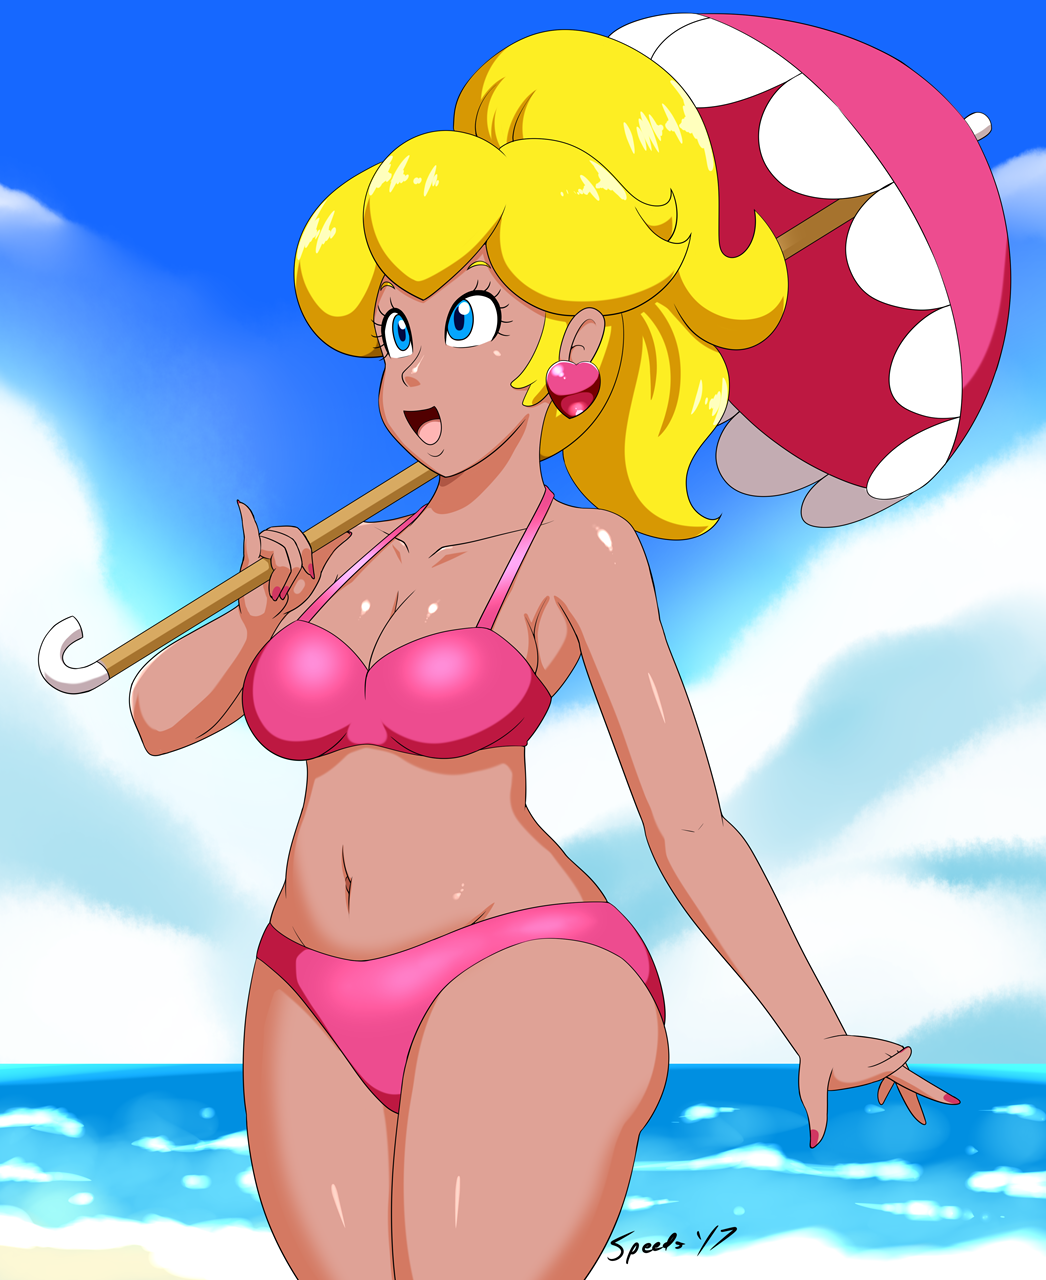 speedyssketchbook: Just some Peach at the beach. :D  Tried a tan version. Not sure